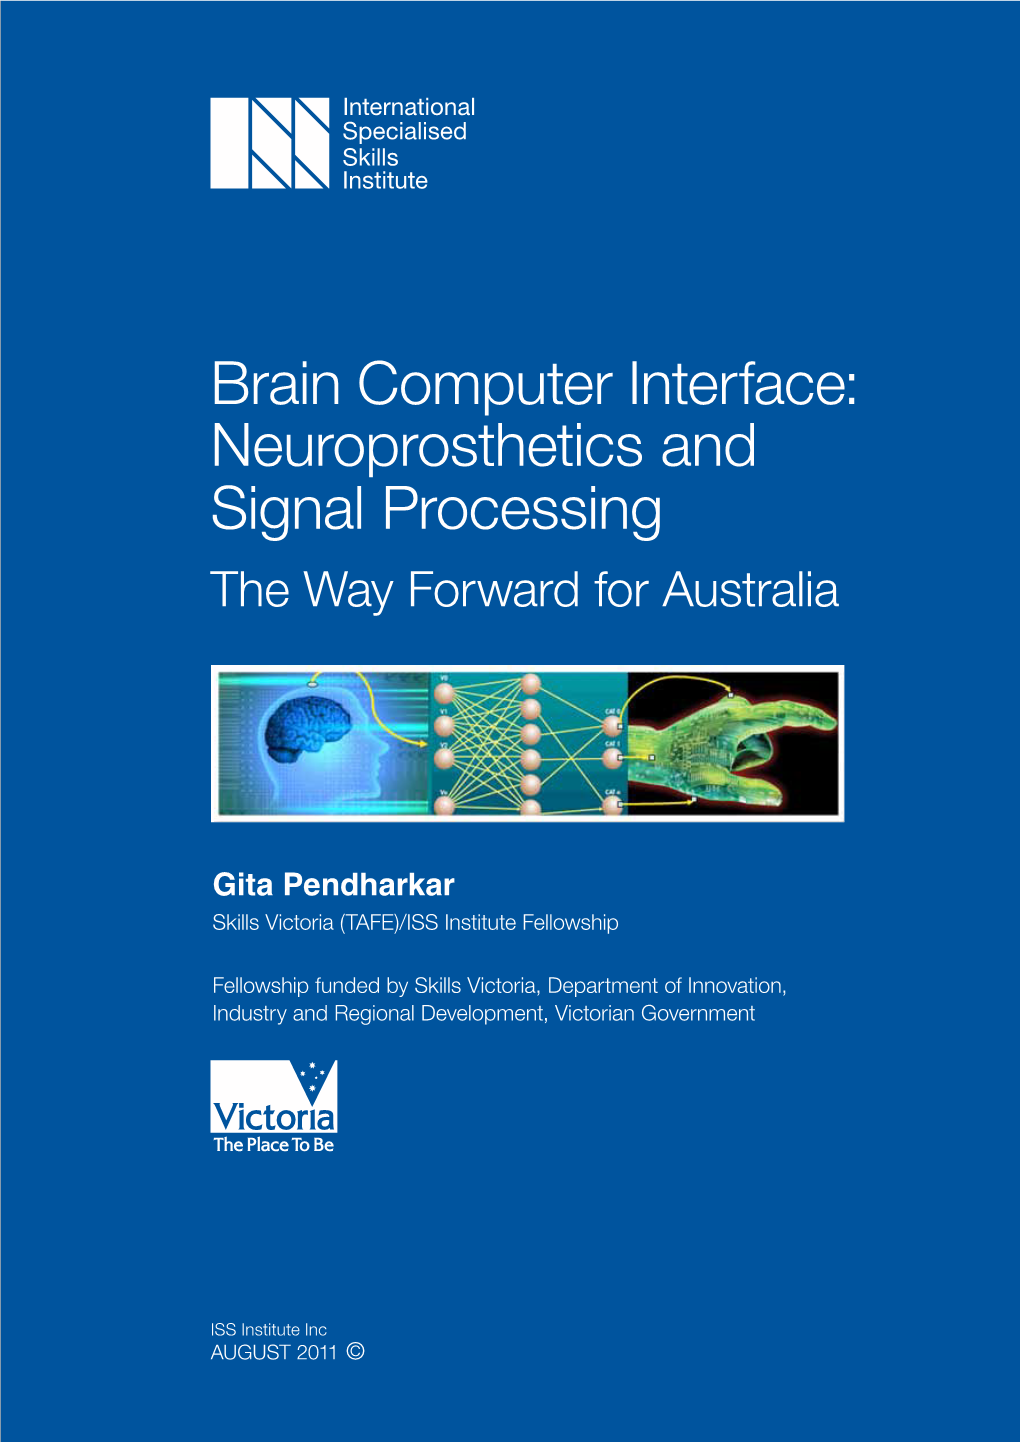 Brain Computer Interface: Neuroprosthetics and Signal Processing the Way Forward for Australia